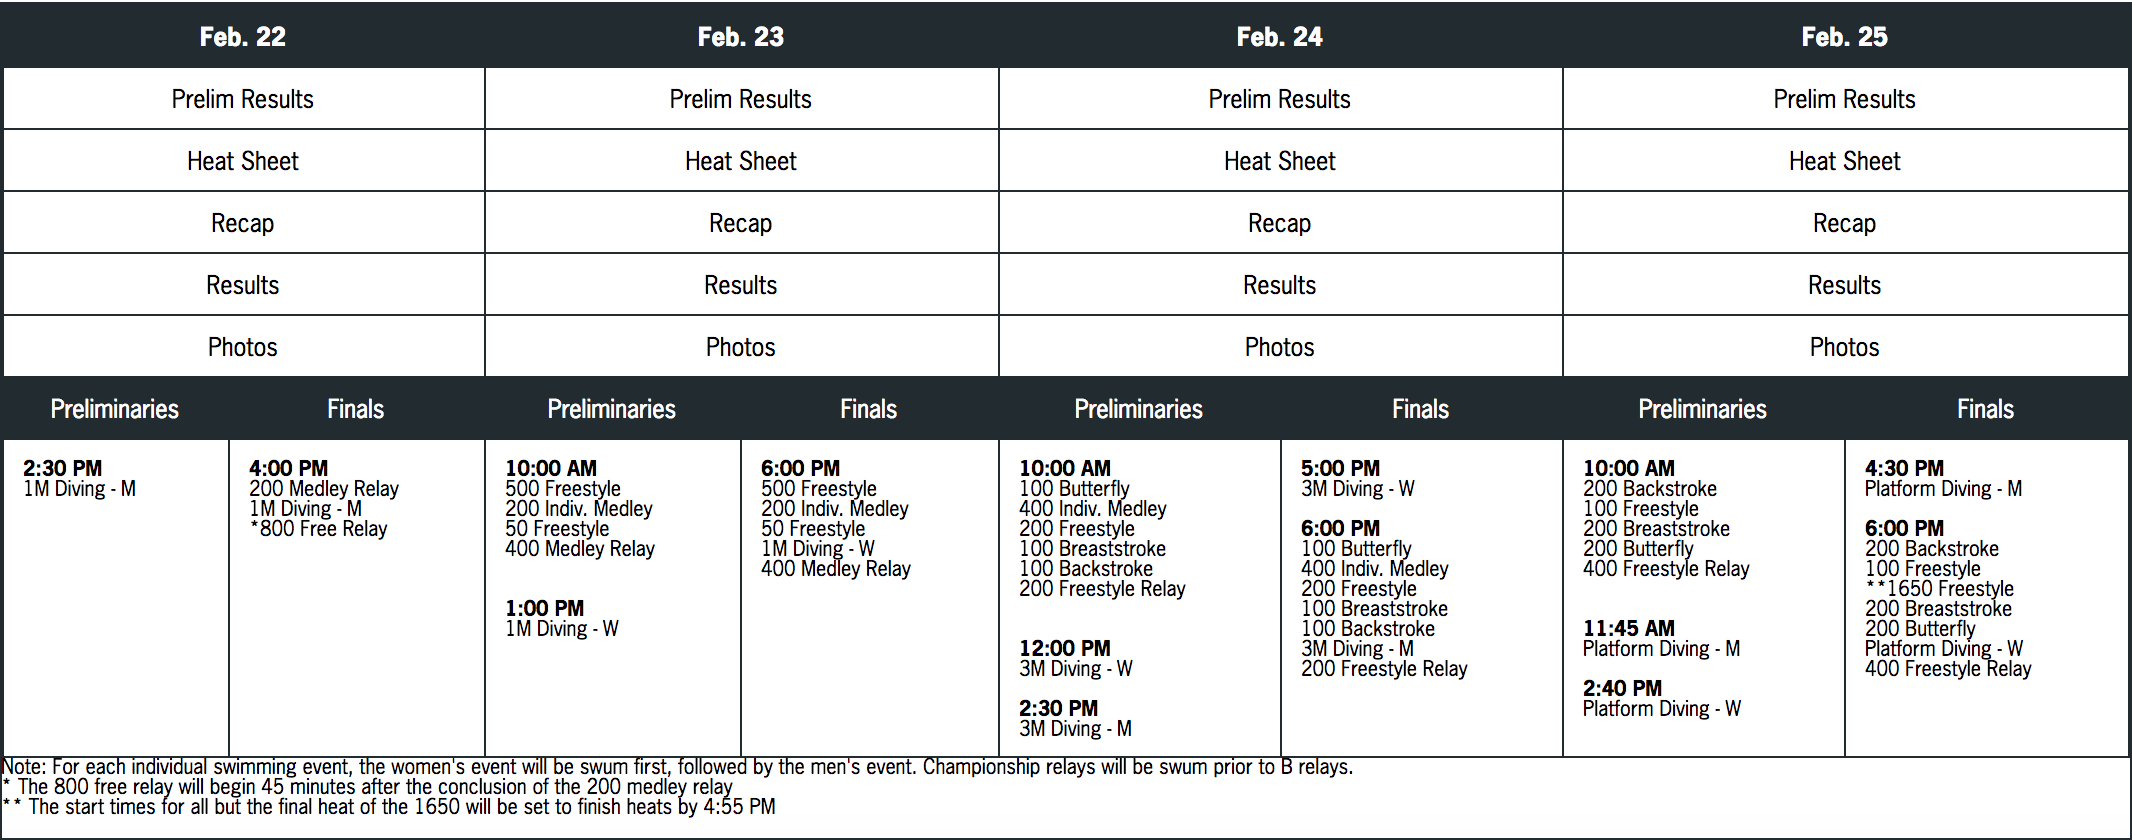 Schedule Big 12 Swimming And Diving